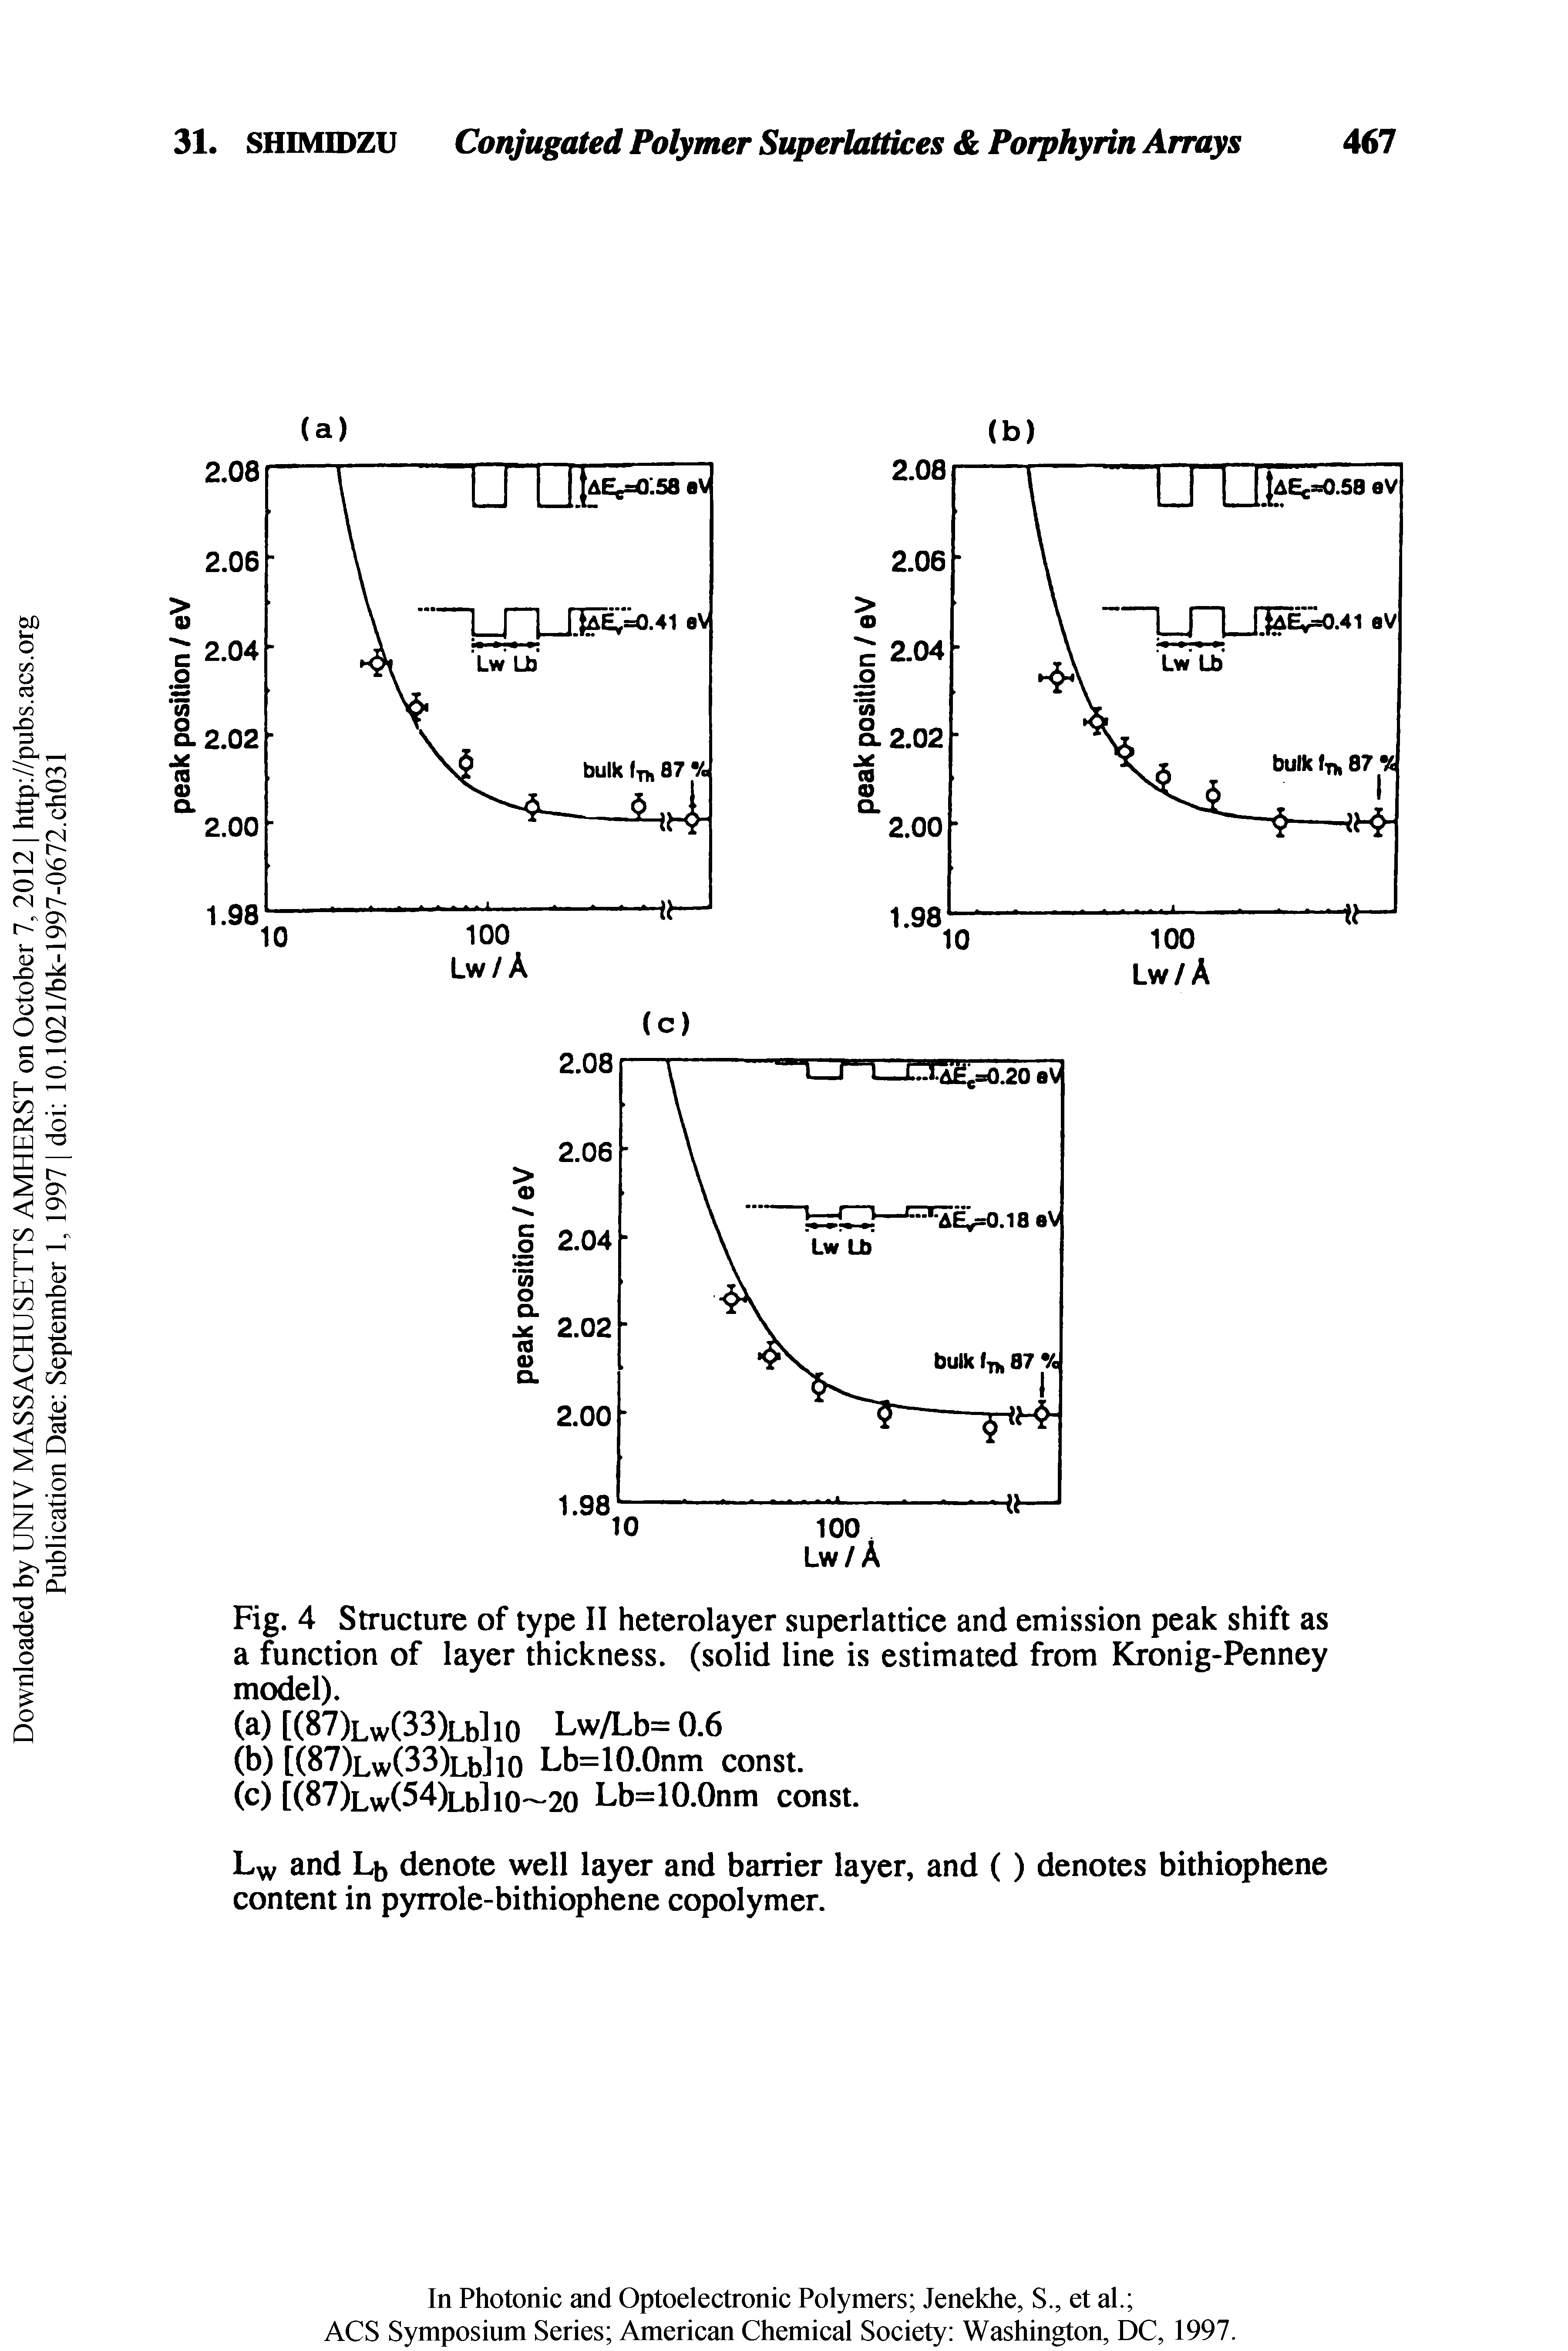 Fig. 4 Structure of type II heterolayer superlattice and emission peak shift as a function of layer thickness, (solid line is estimated from Kronig-Penney model).